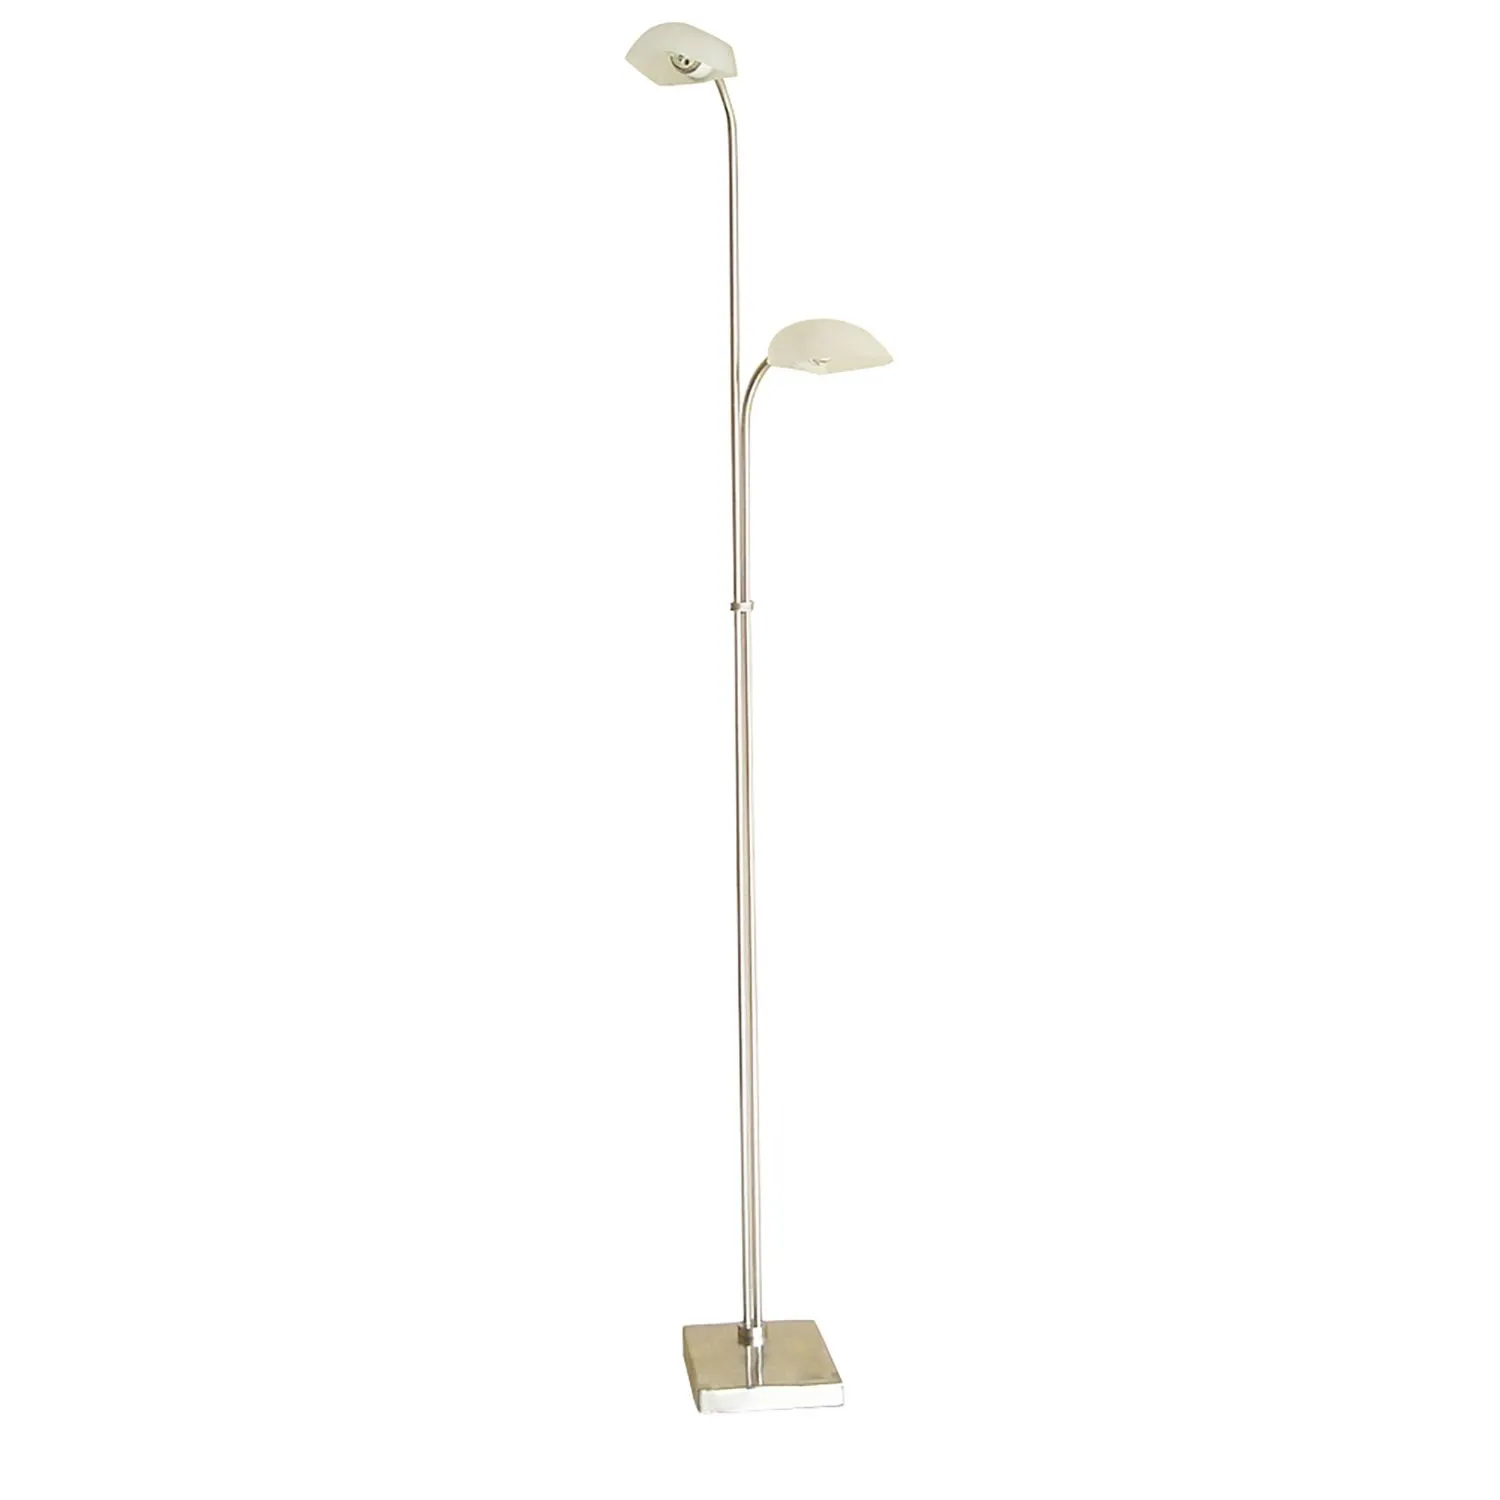 Udine Floor Lamp With In Line Dimmer 2 Light G9 Satin Chrome Frosted Glass, NOT LED CFL Compatible